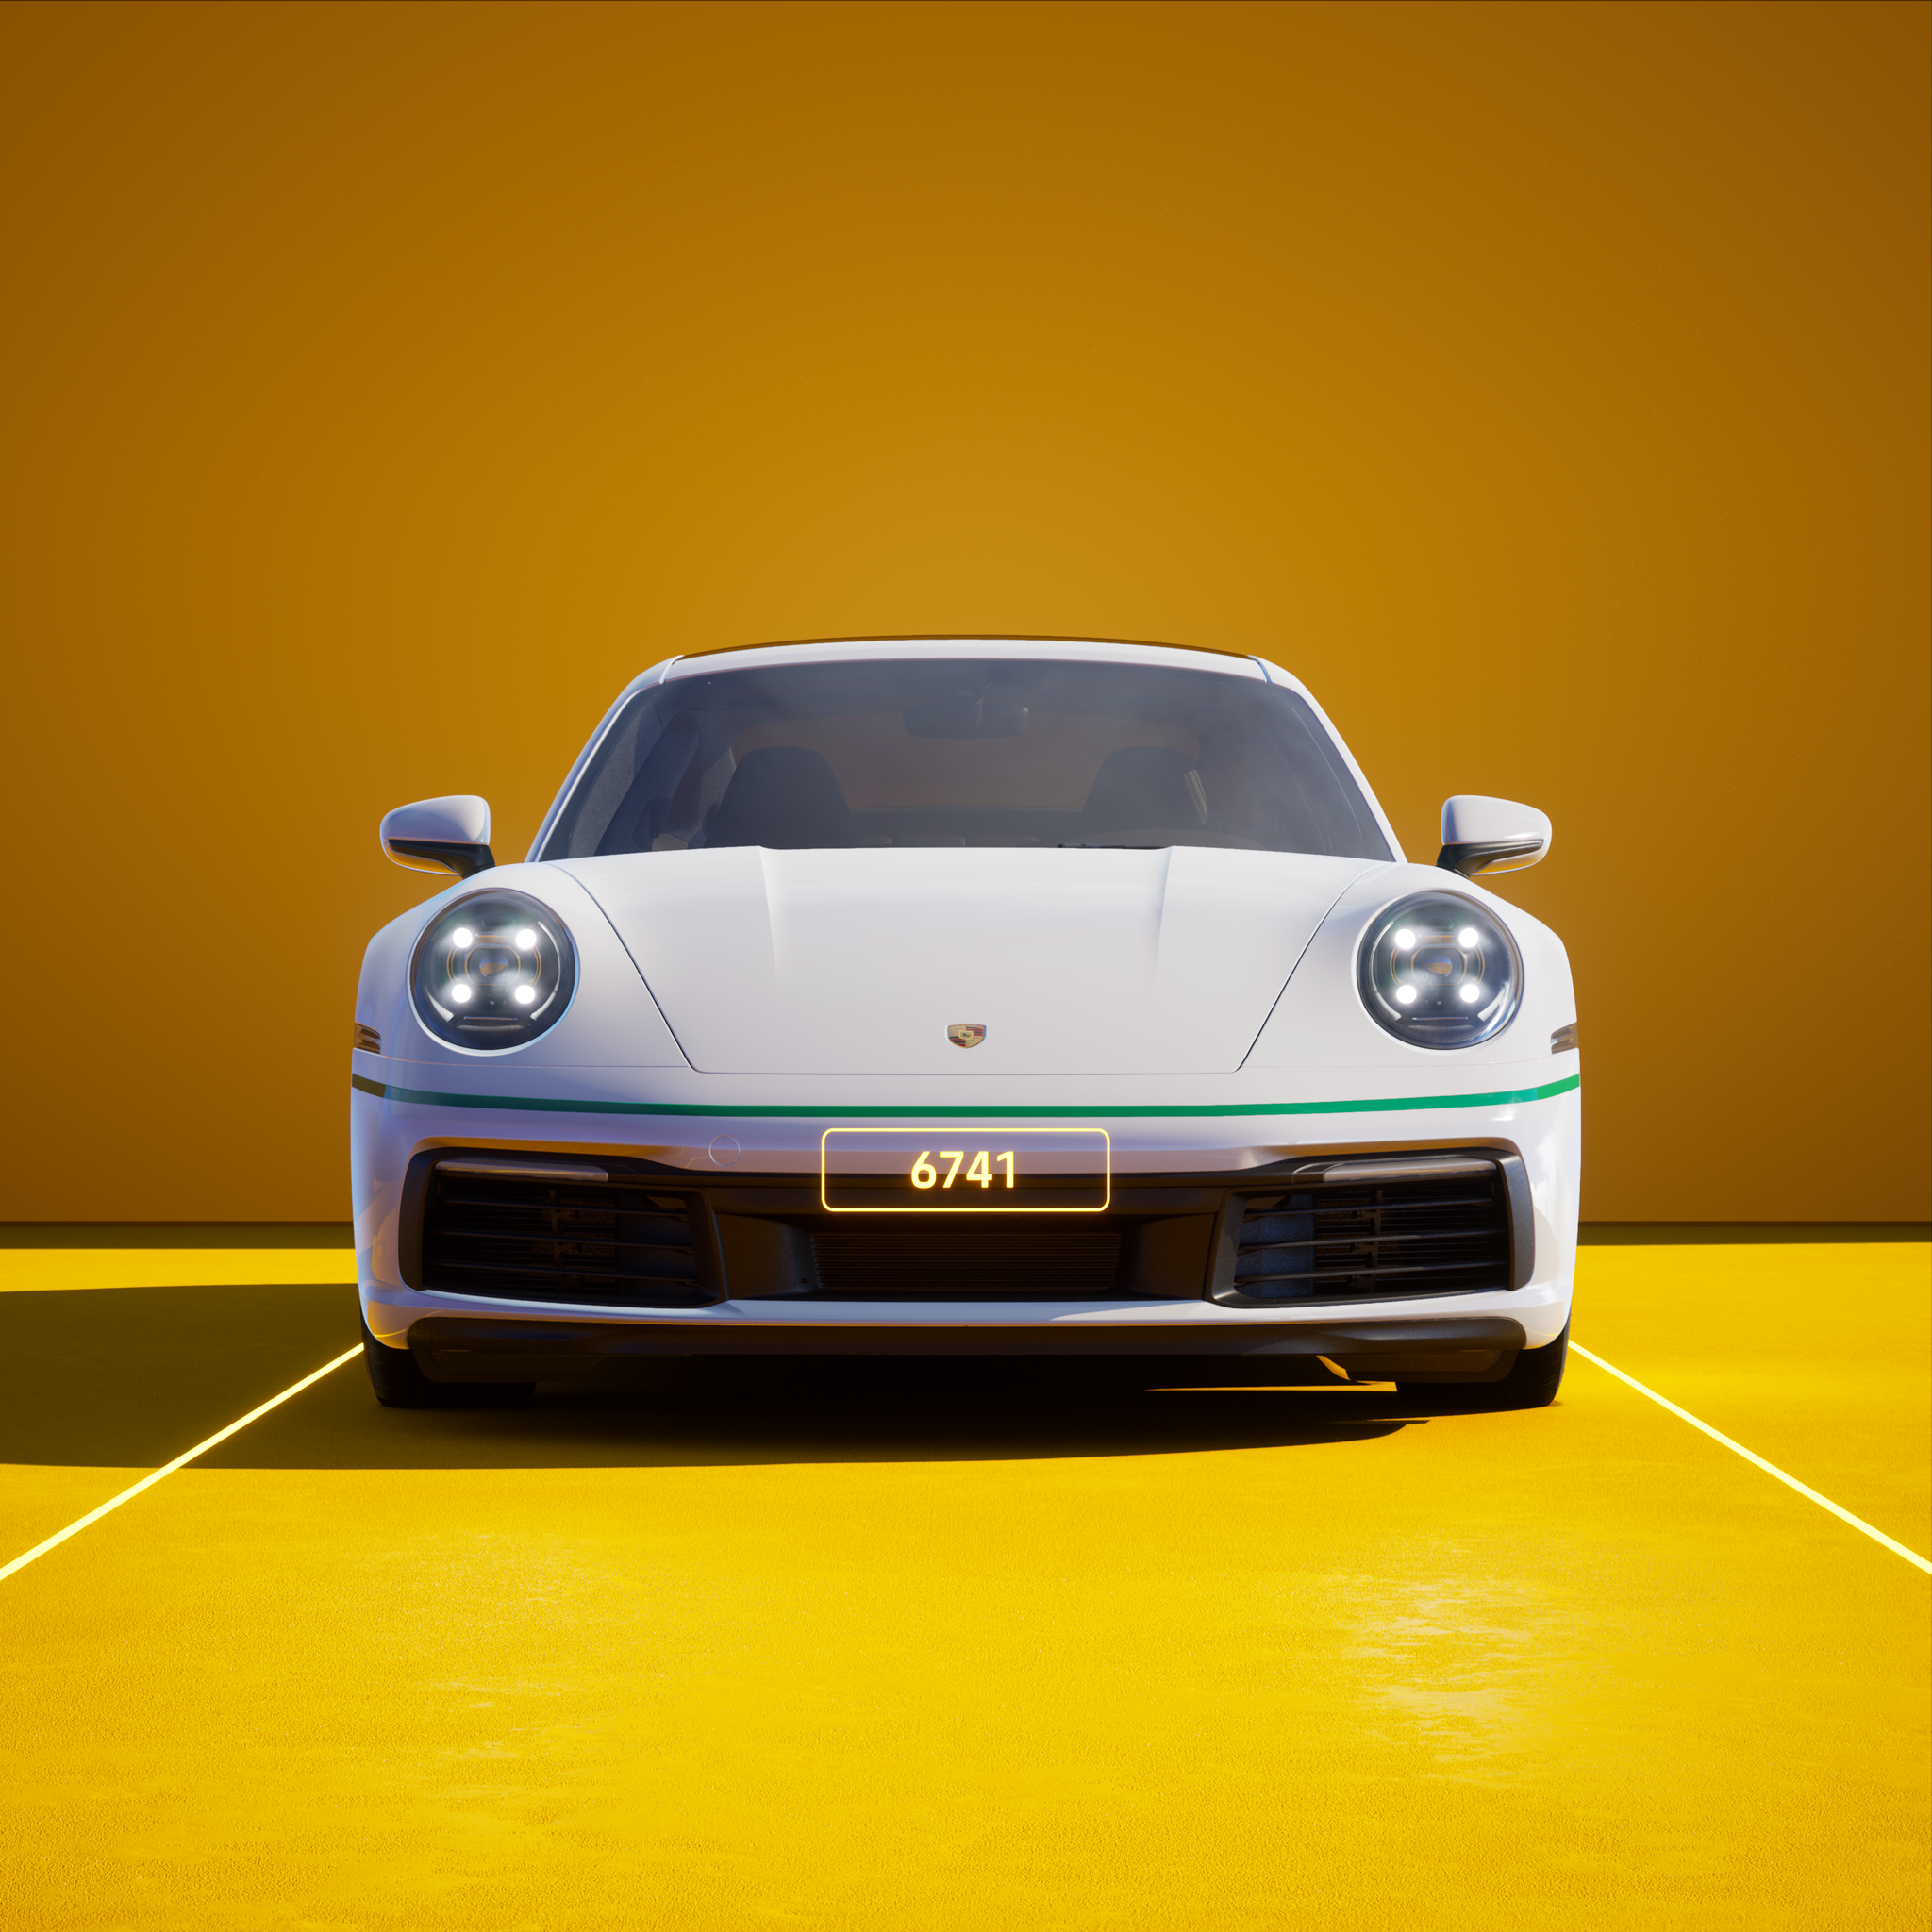 The PORSCHΞ 911 6741 image in phase